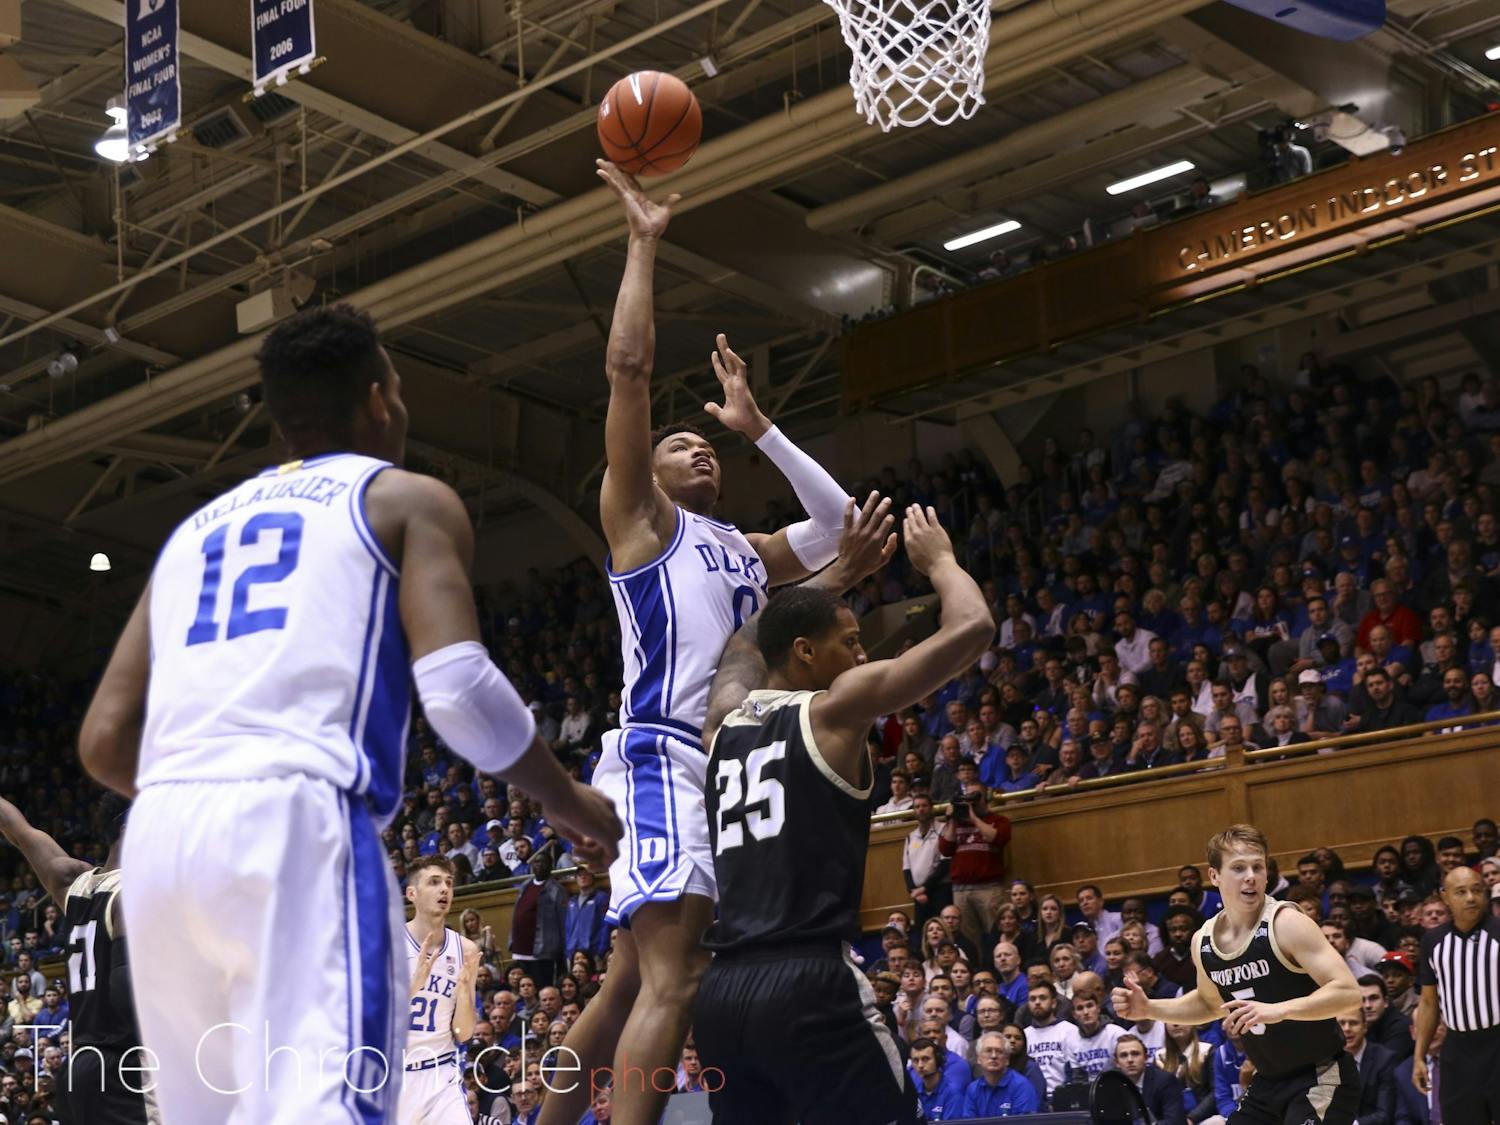 Despite the absence of Tre Jones who was out with a mild sprain, the Blue Devils showed the strength of their communication and soundly defeated Wofford 86 to 57 at Home in Cameron Thursday Night. Check out head photo editors Charles York's and Mary Helen Wood's best shots from the evening.